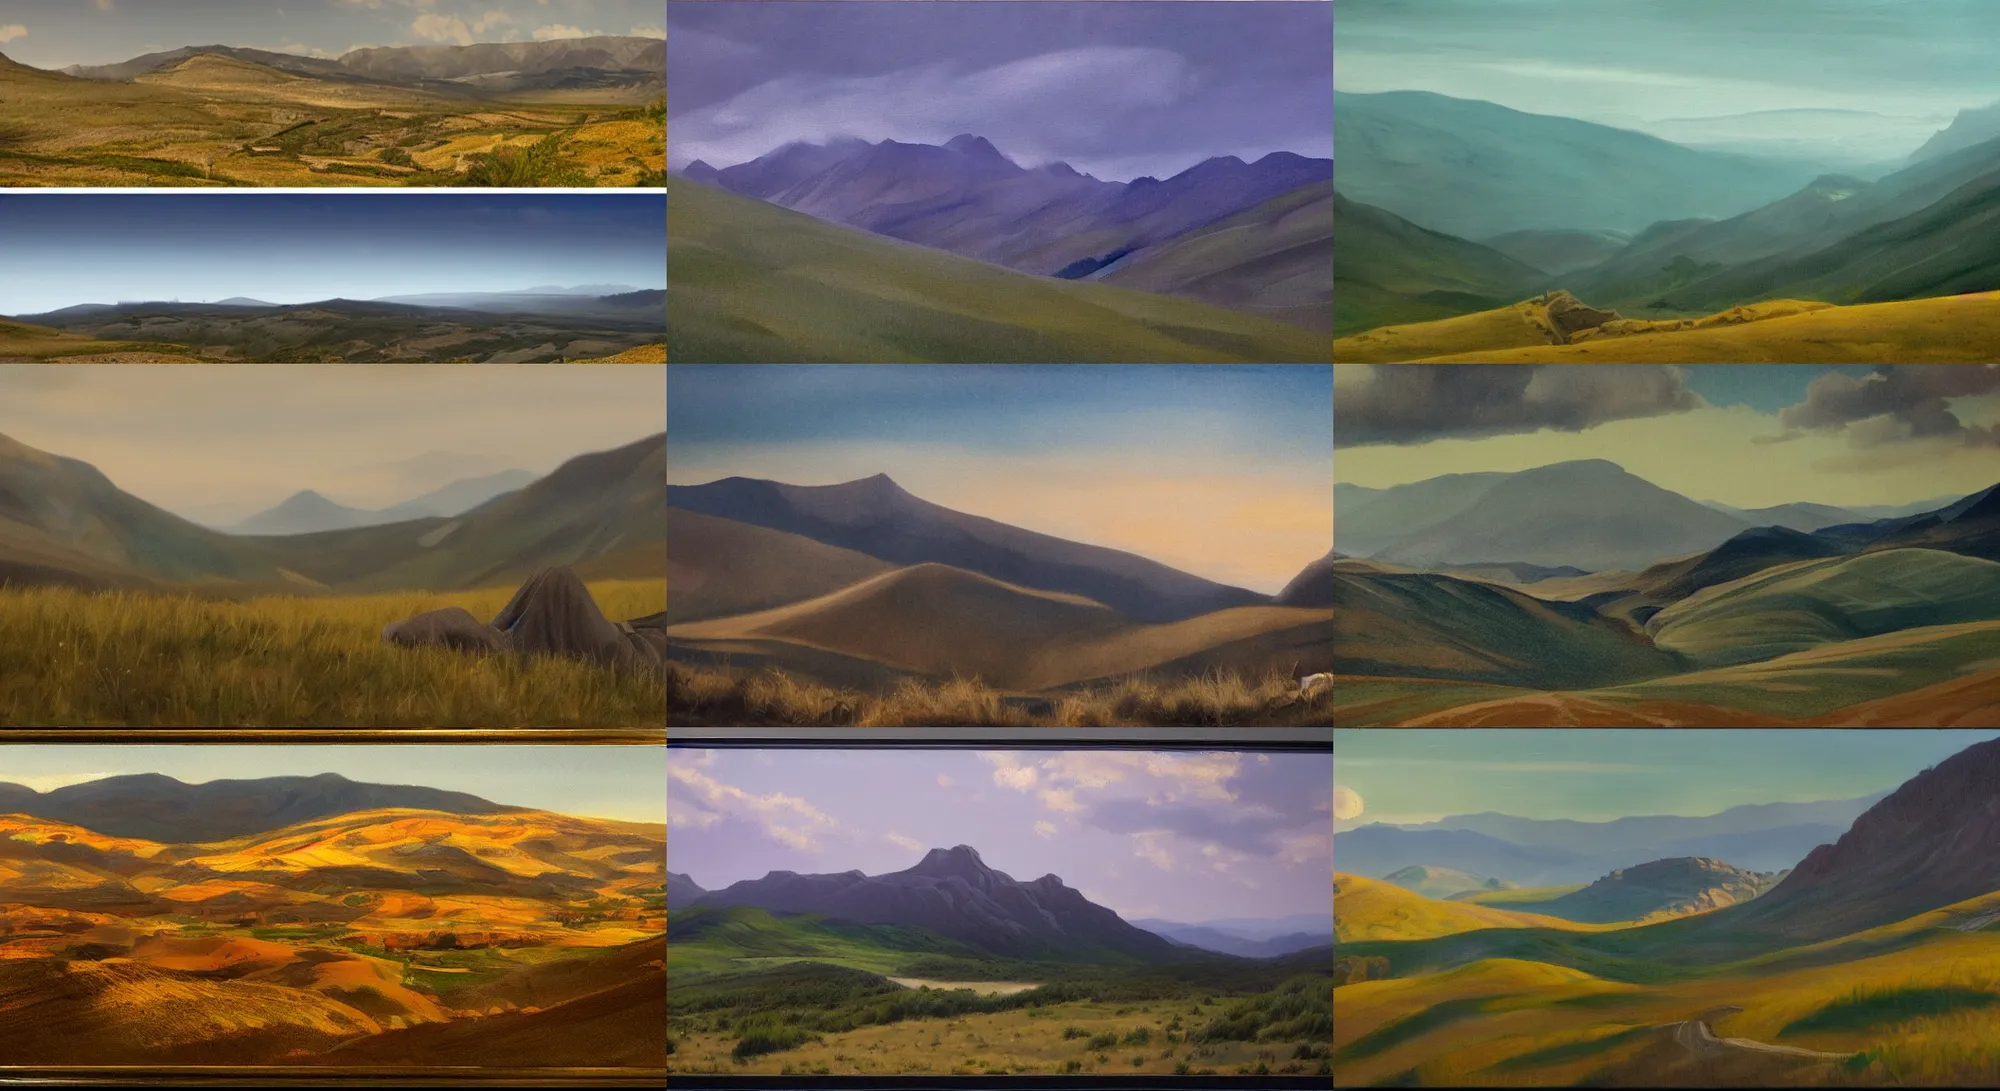 Prompt: epi composition, hills and mountains, shot from danis villeneuve movie, roger deakins filming, nightfall, painting in the style of frederick judd waugh and josh clare